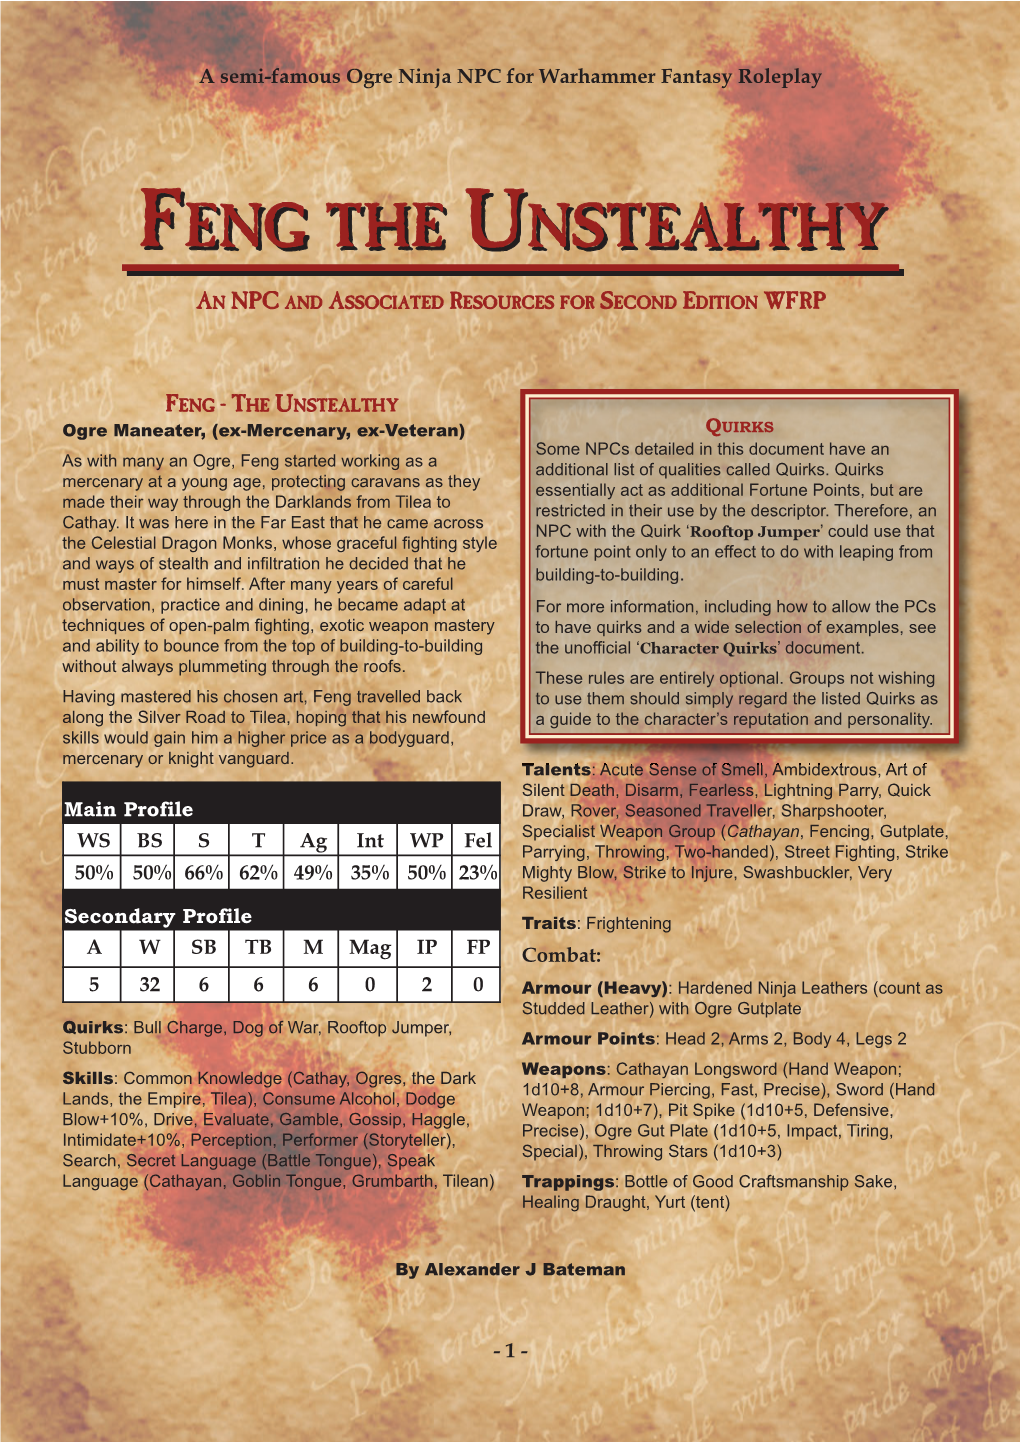 Feng the Unstealthy